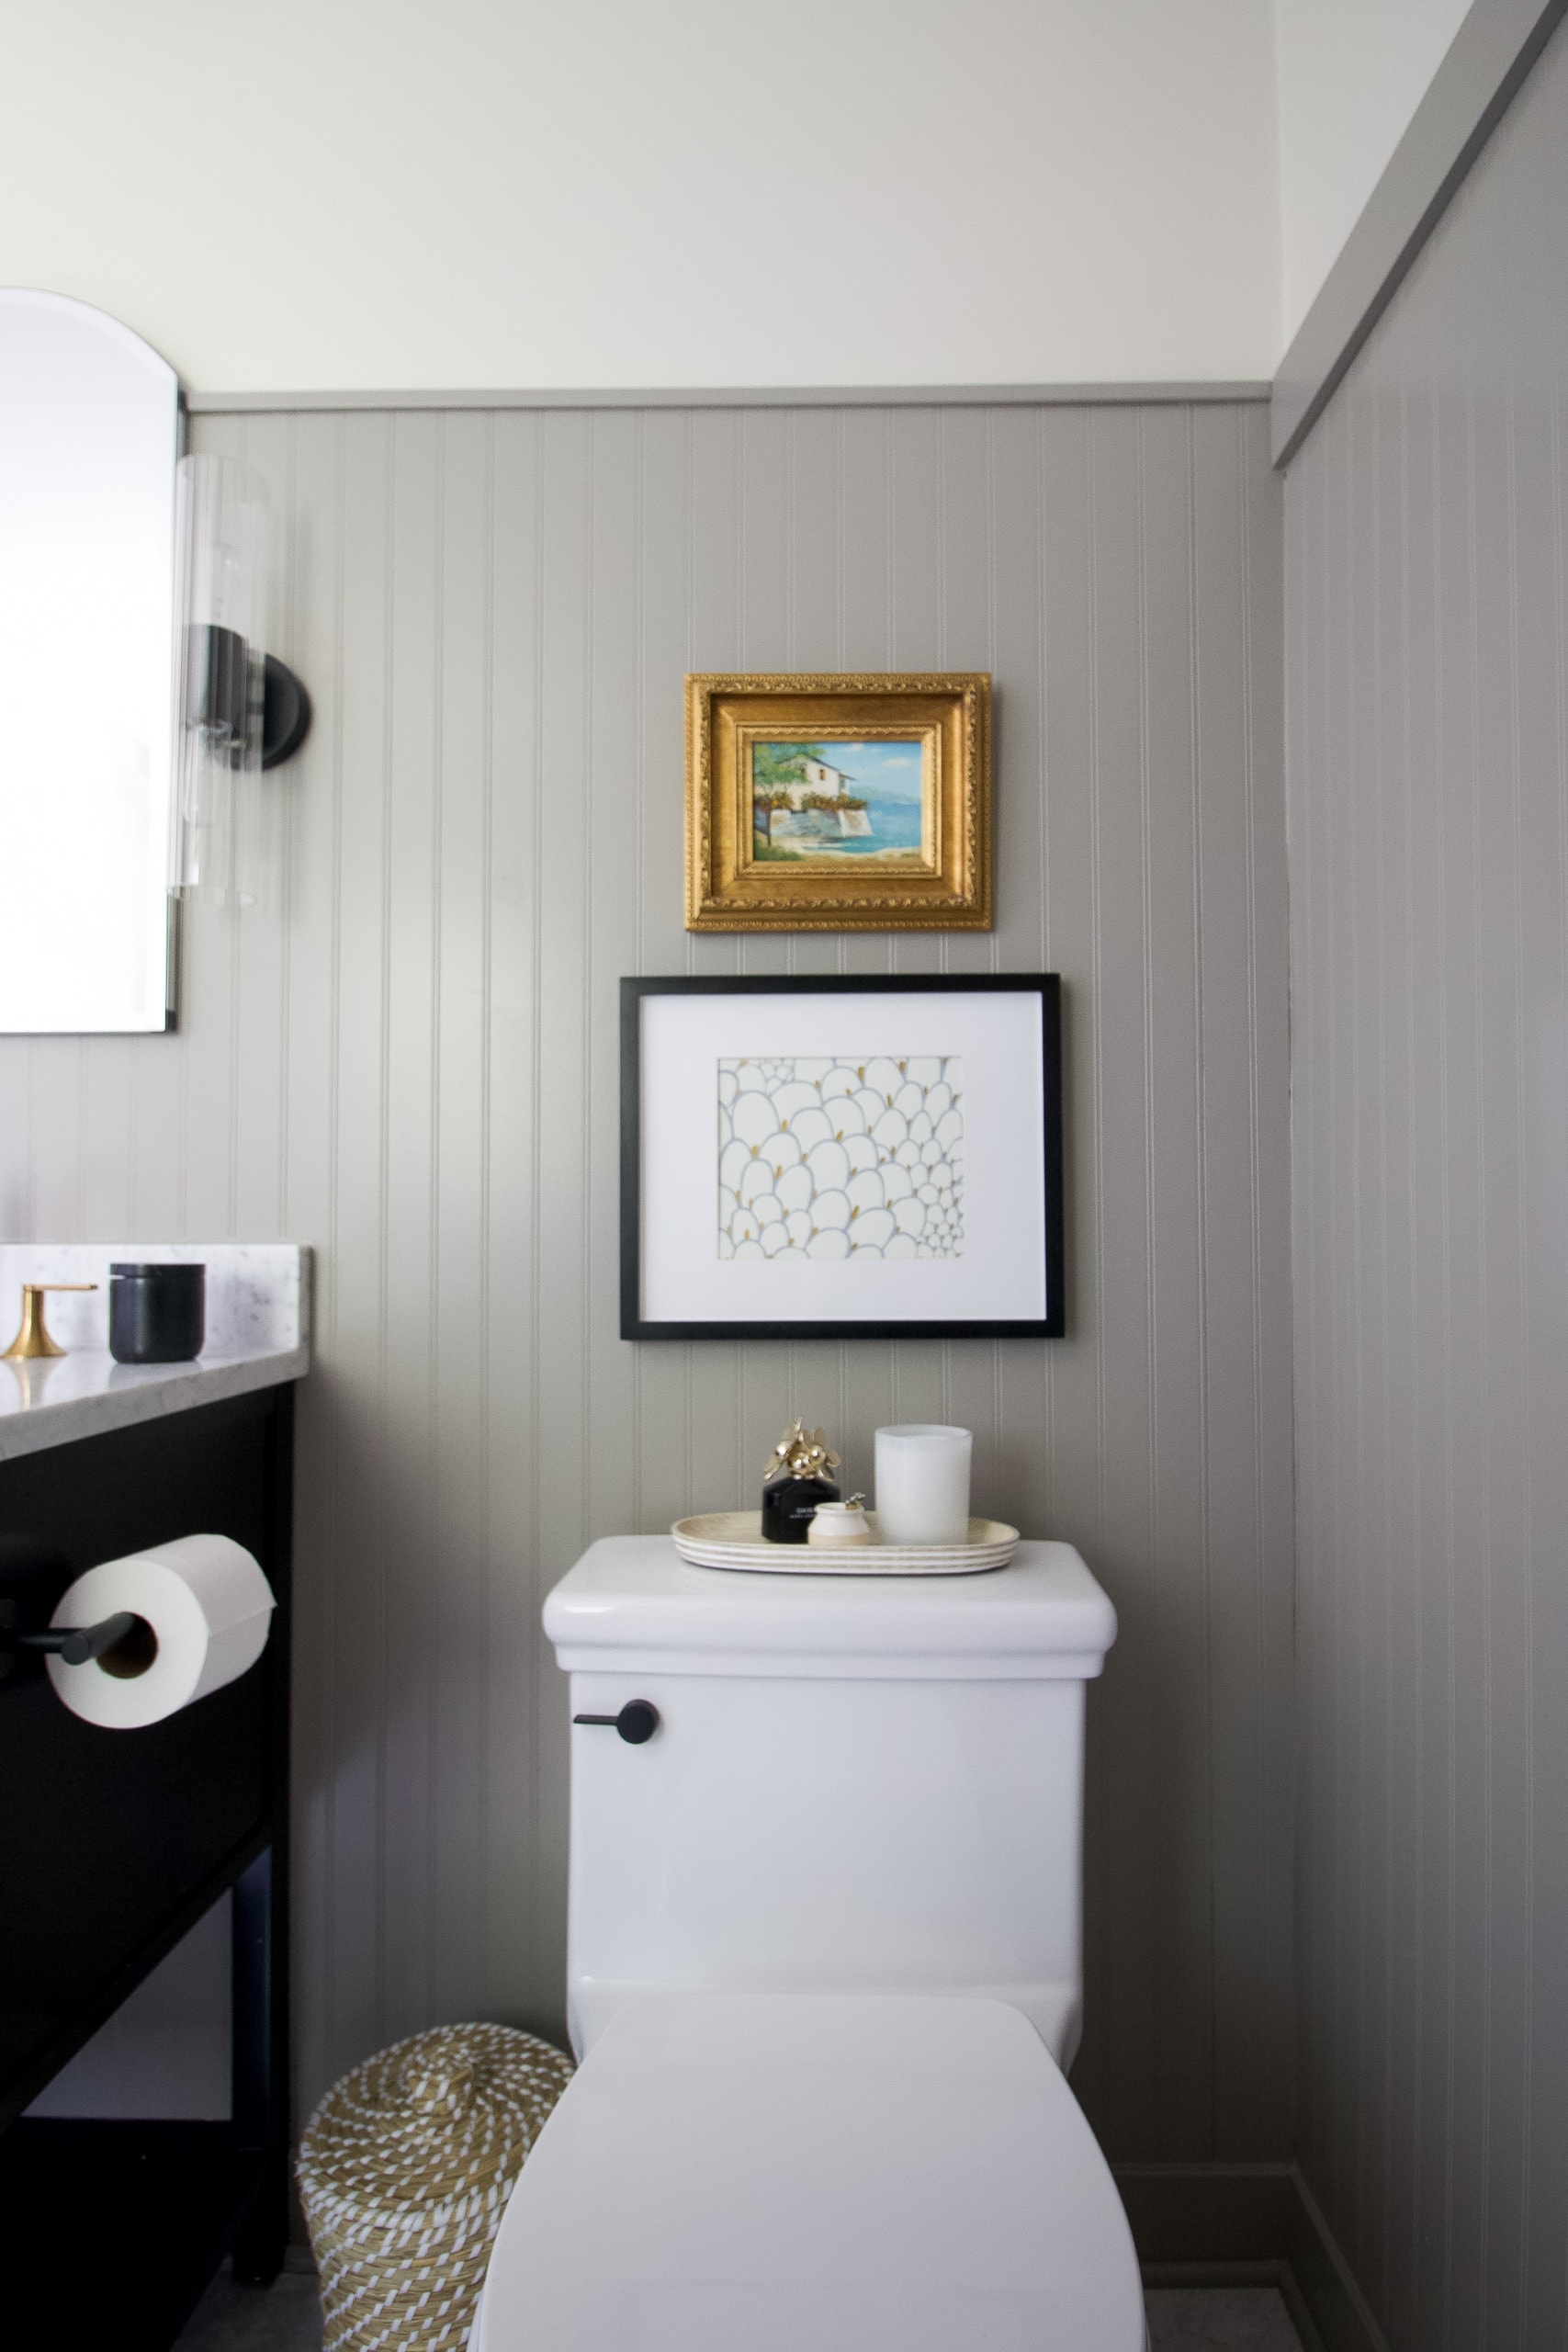 The toilet in our black and gold marble bathroom